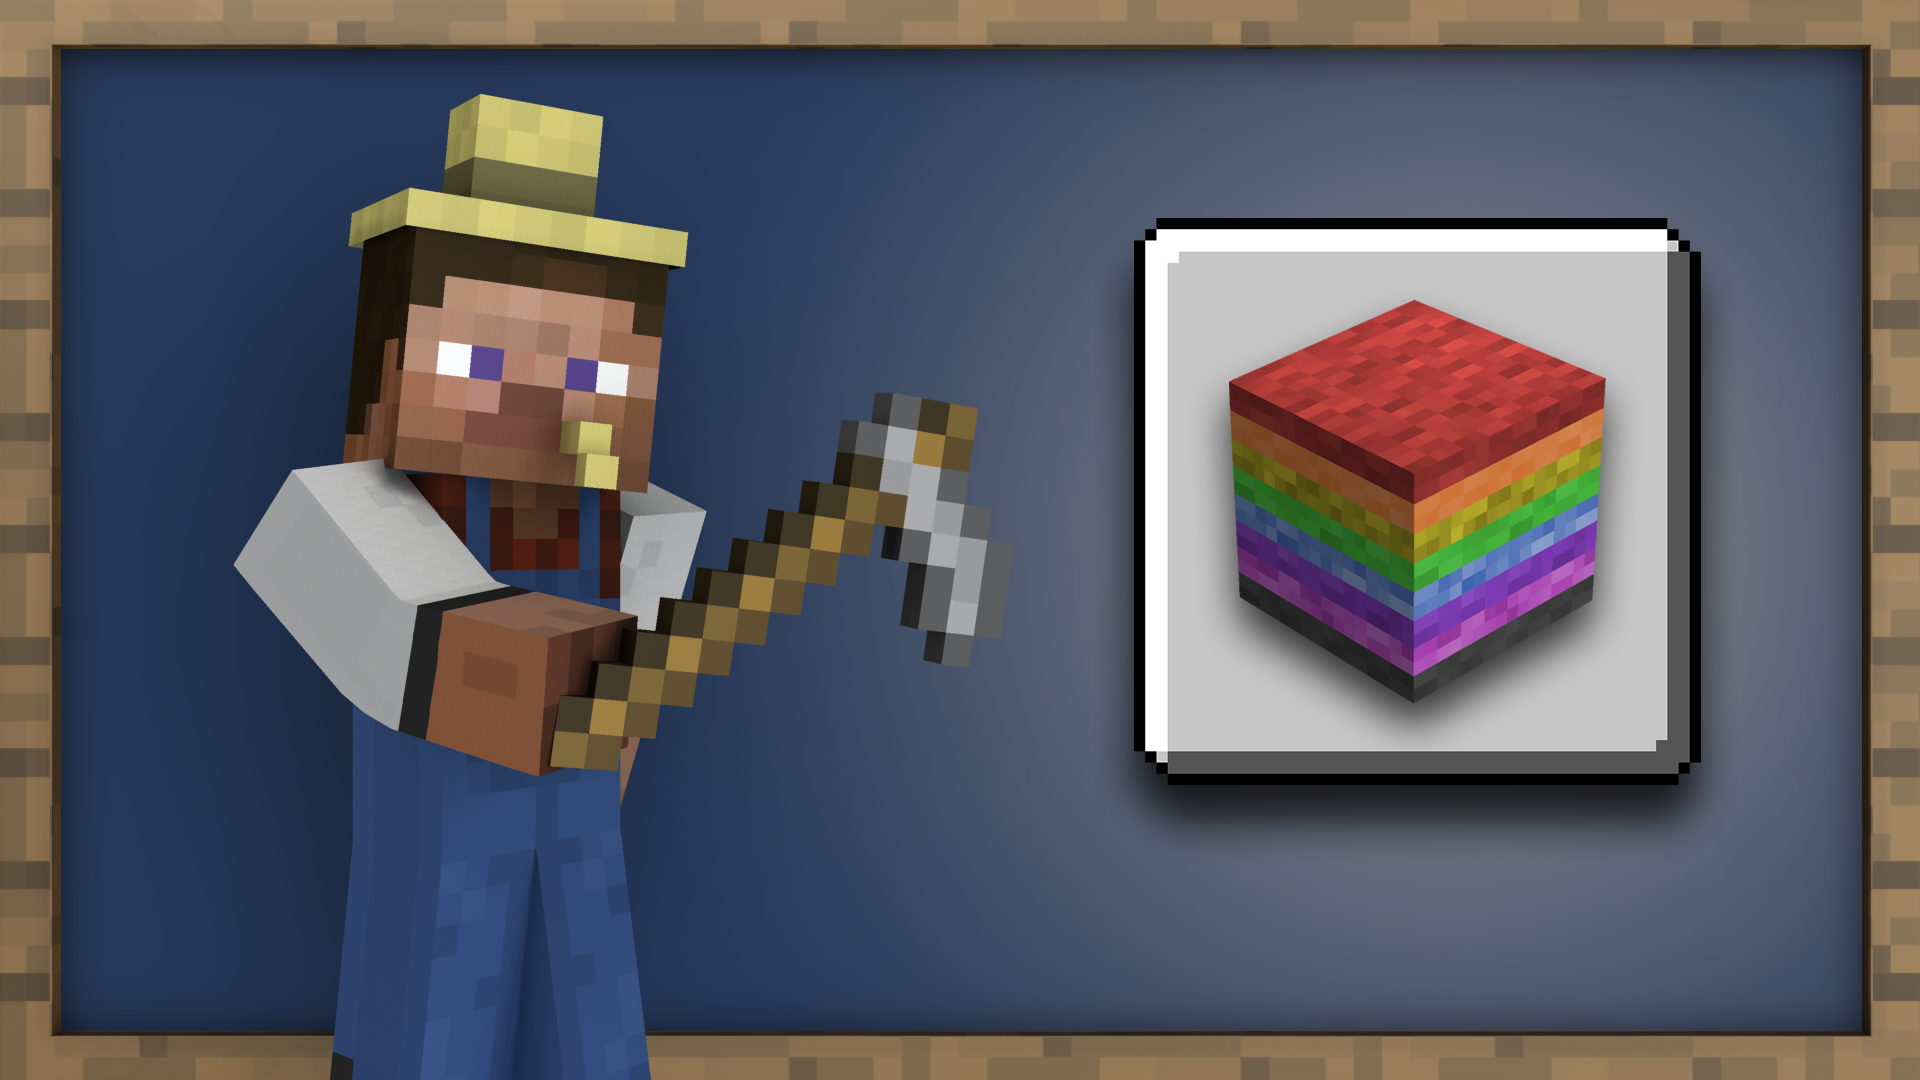 Icon for Rainbow Collection